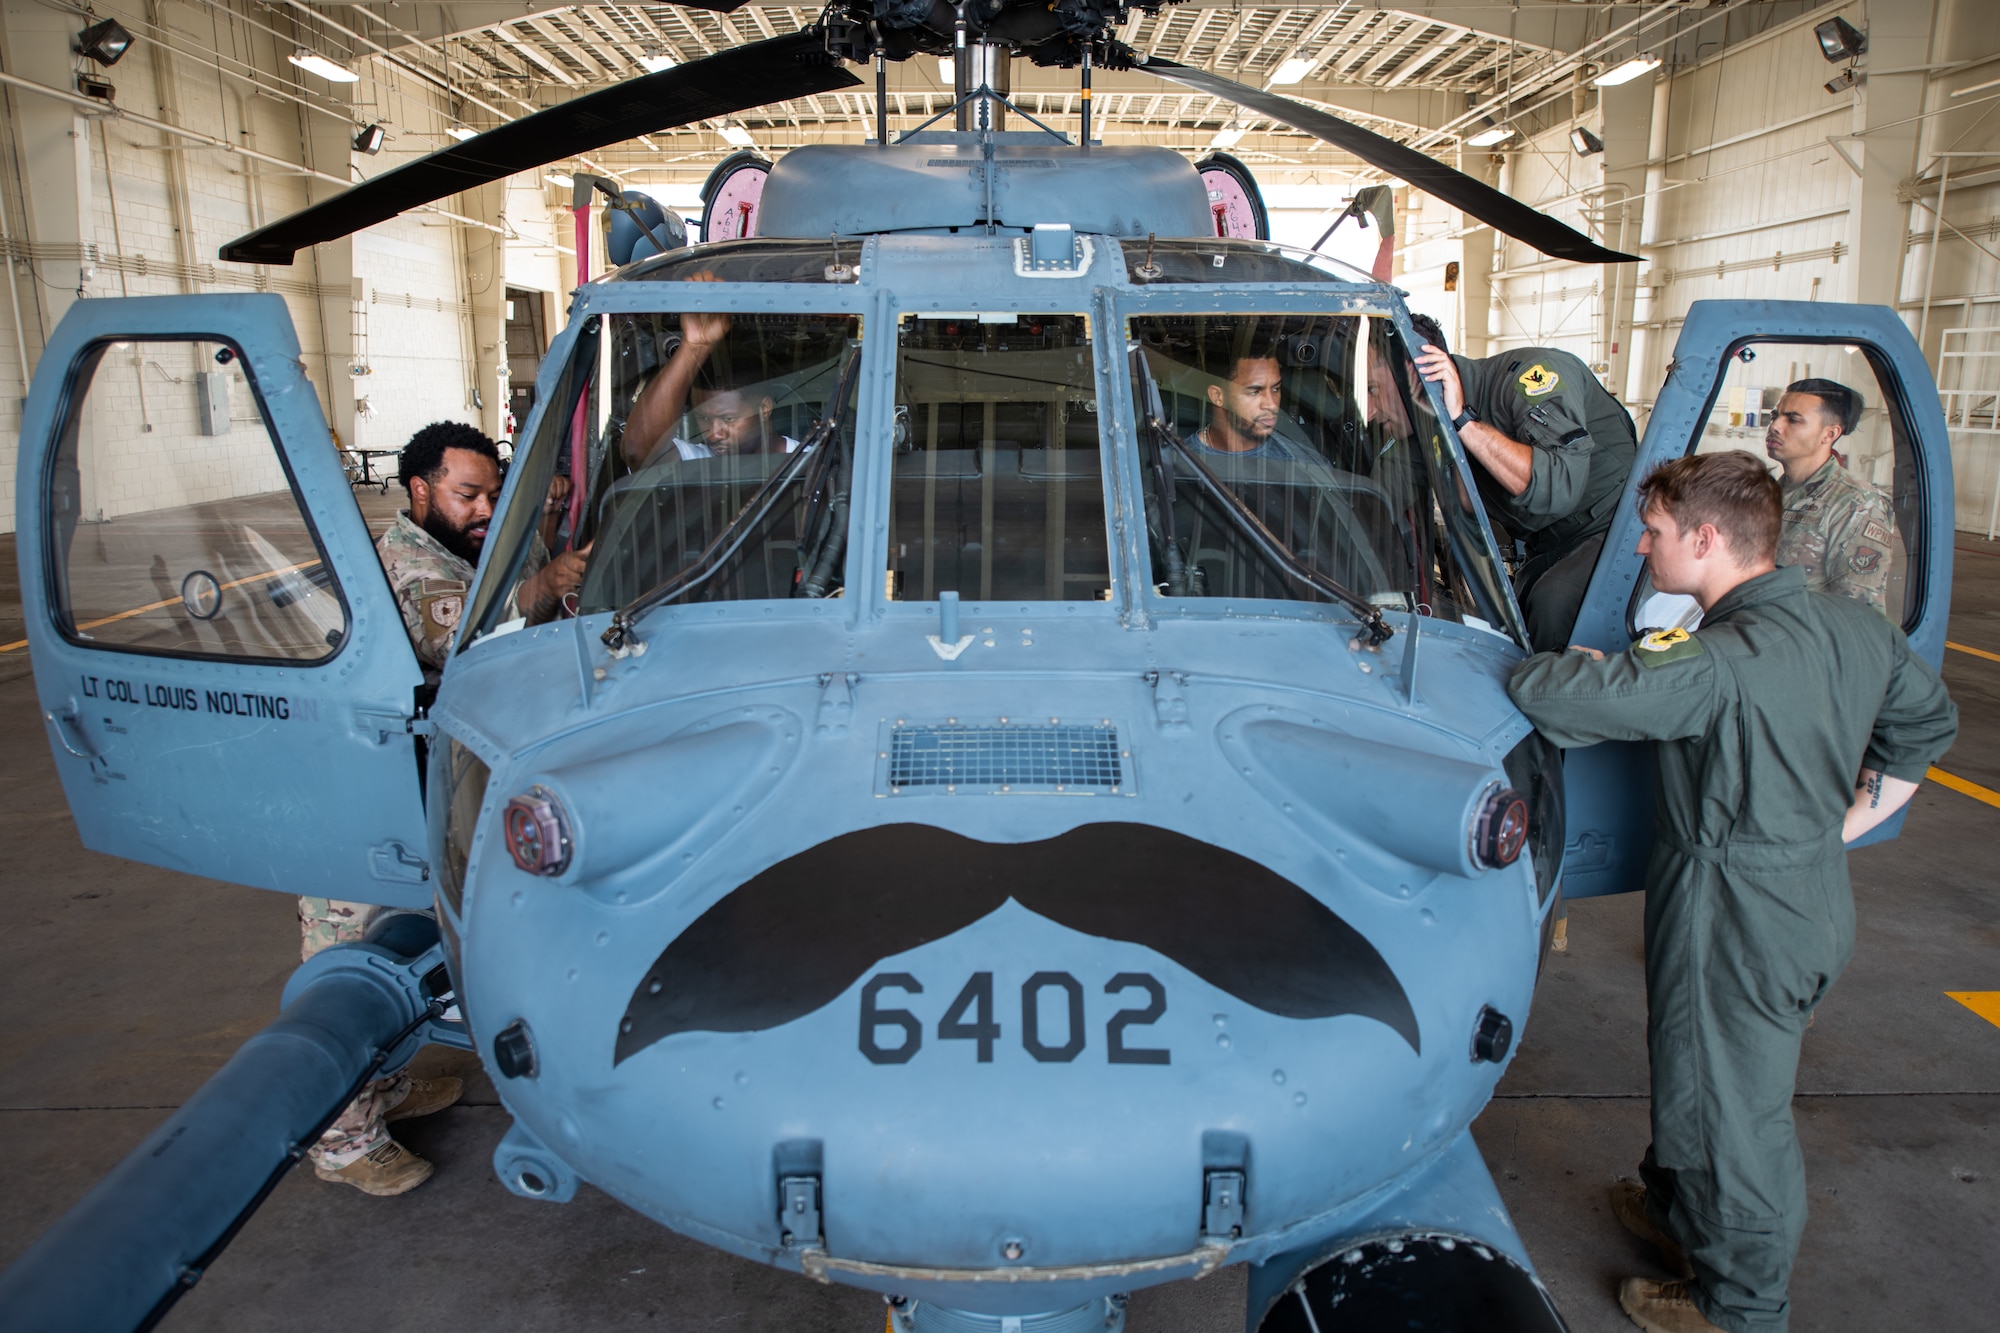 Several man crowed around the cockpit of a helicopter.